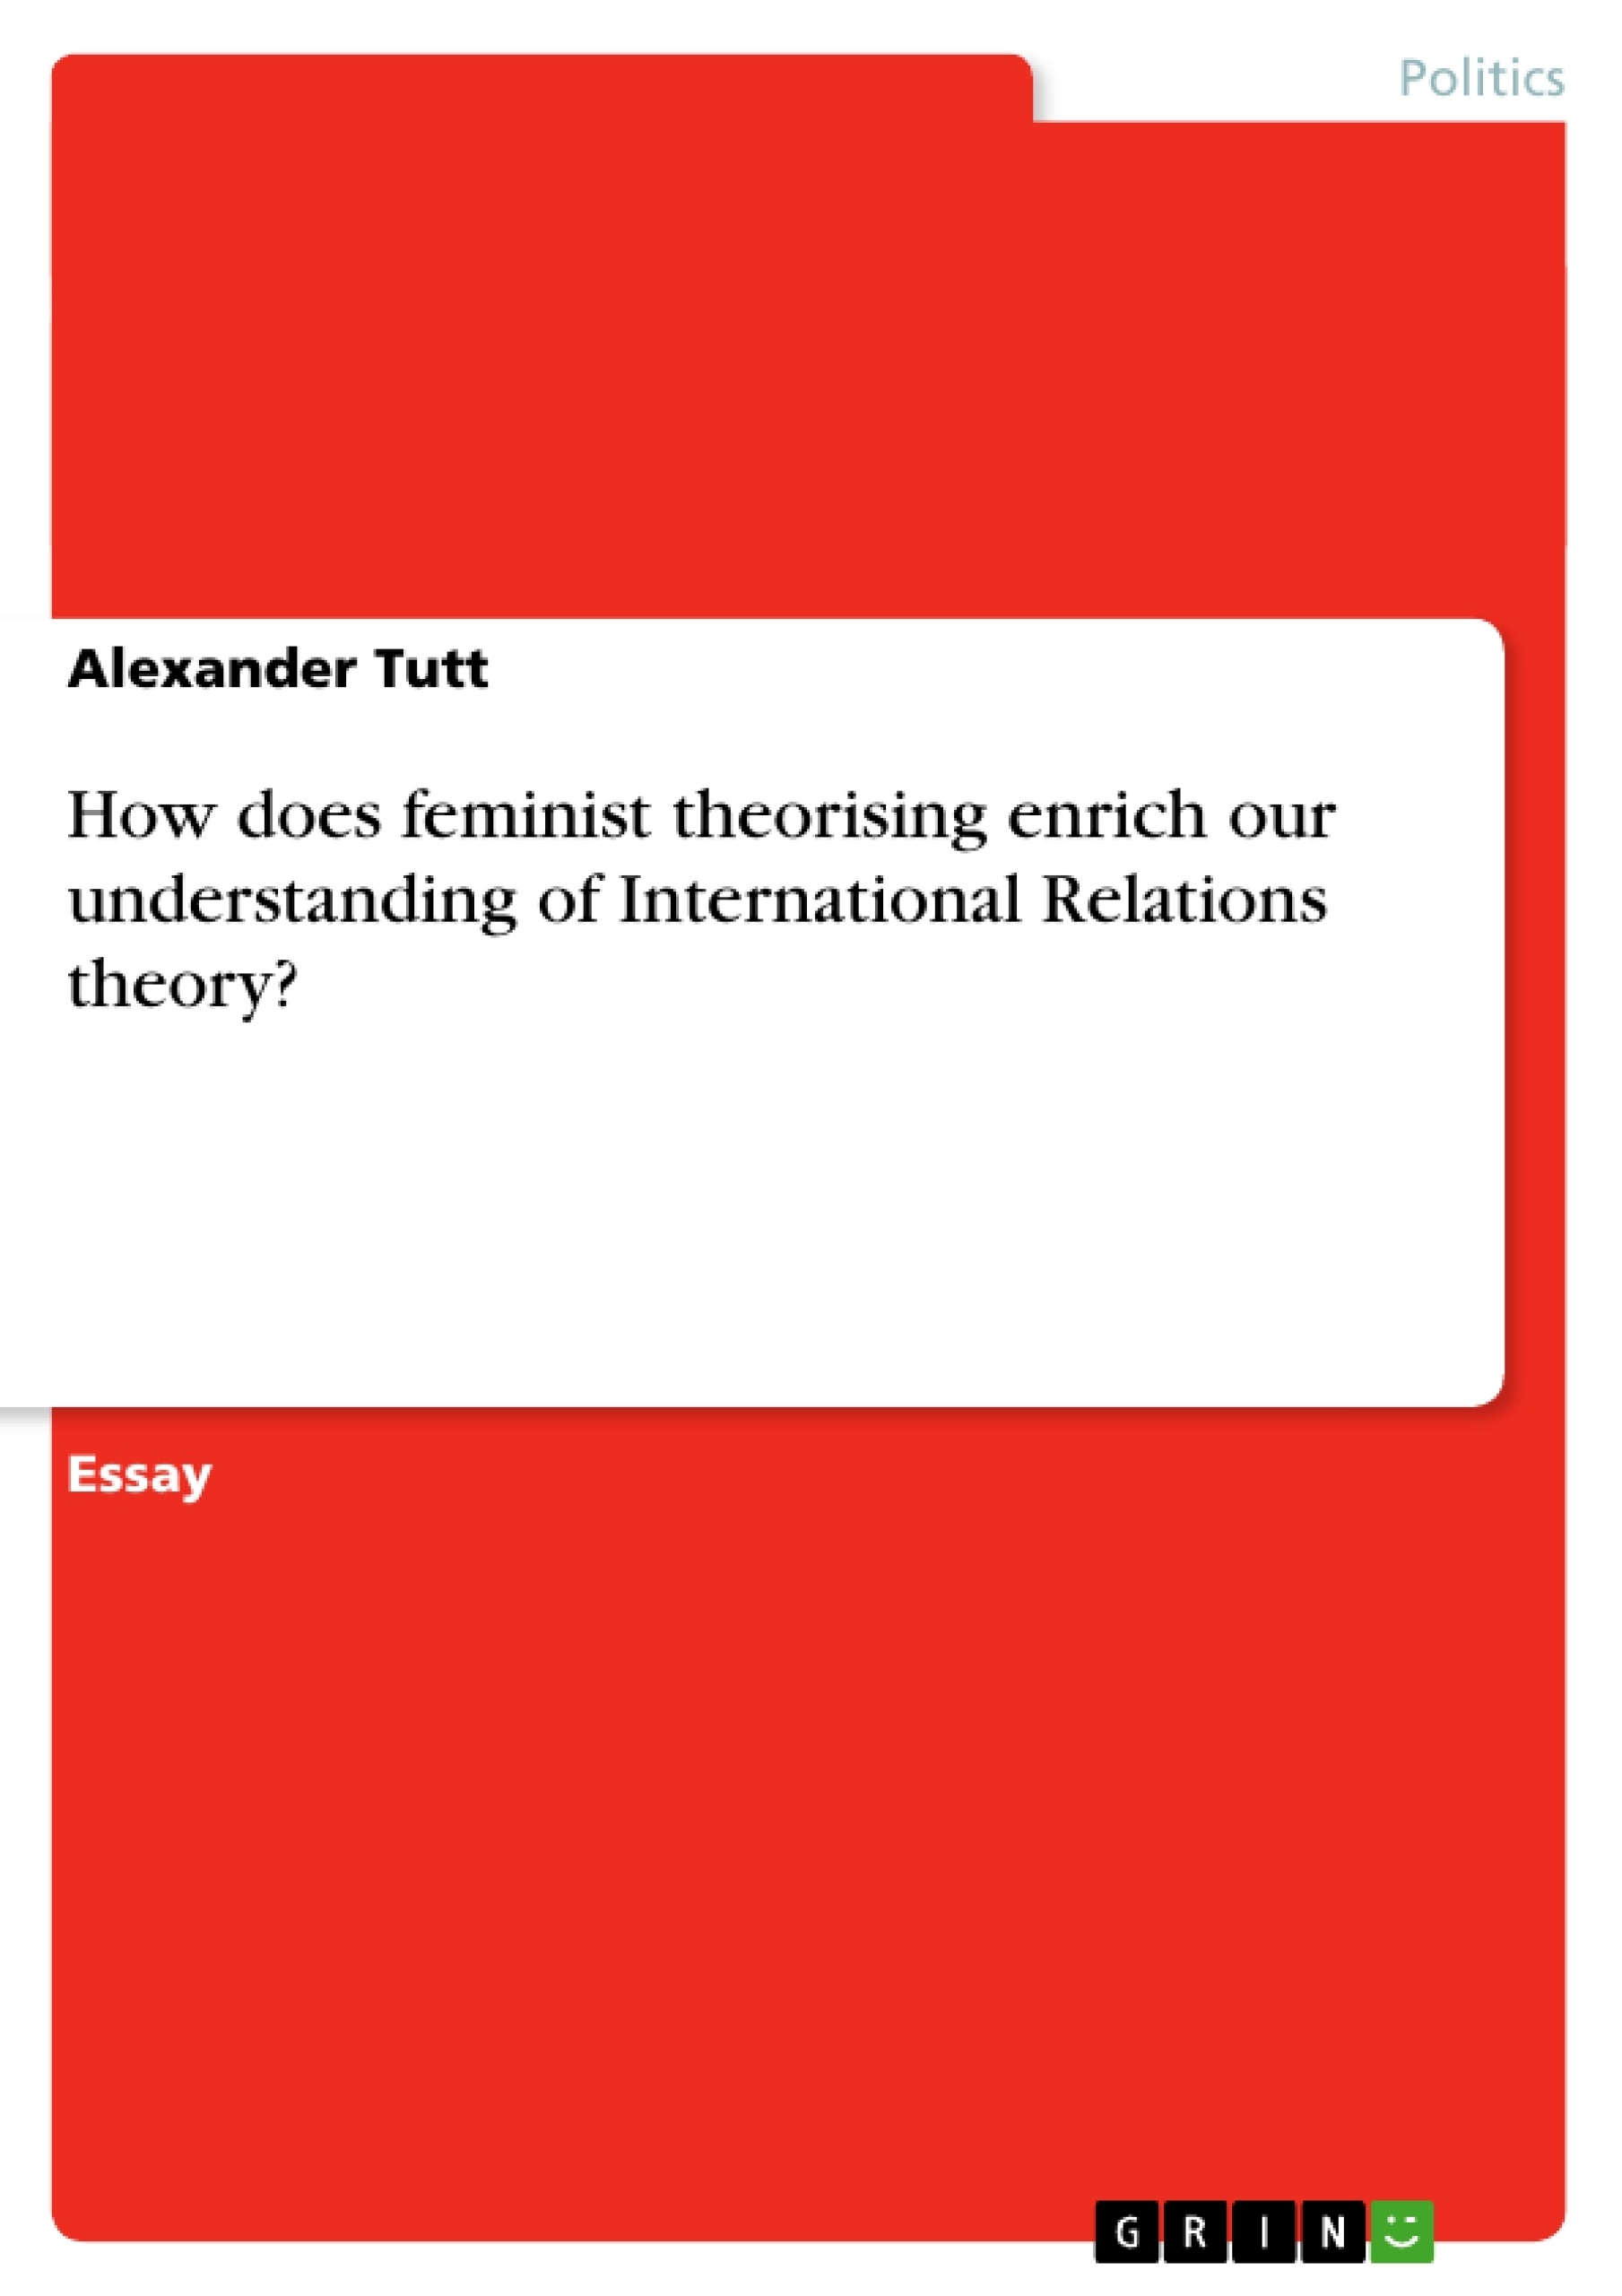 Title: How does feminist theorising enrich our understanding of International Relations theory?